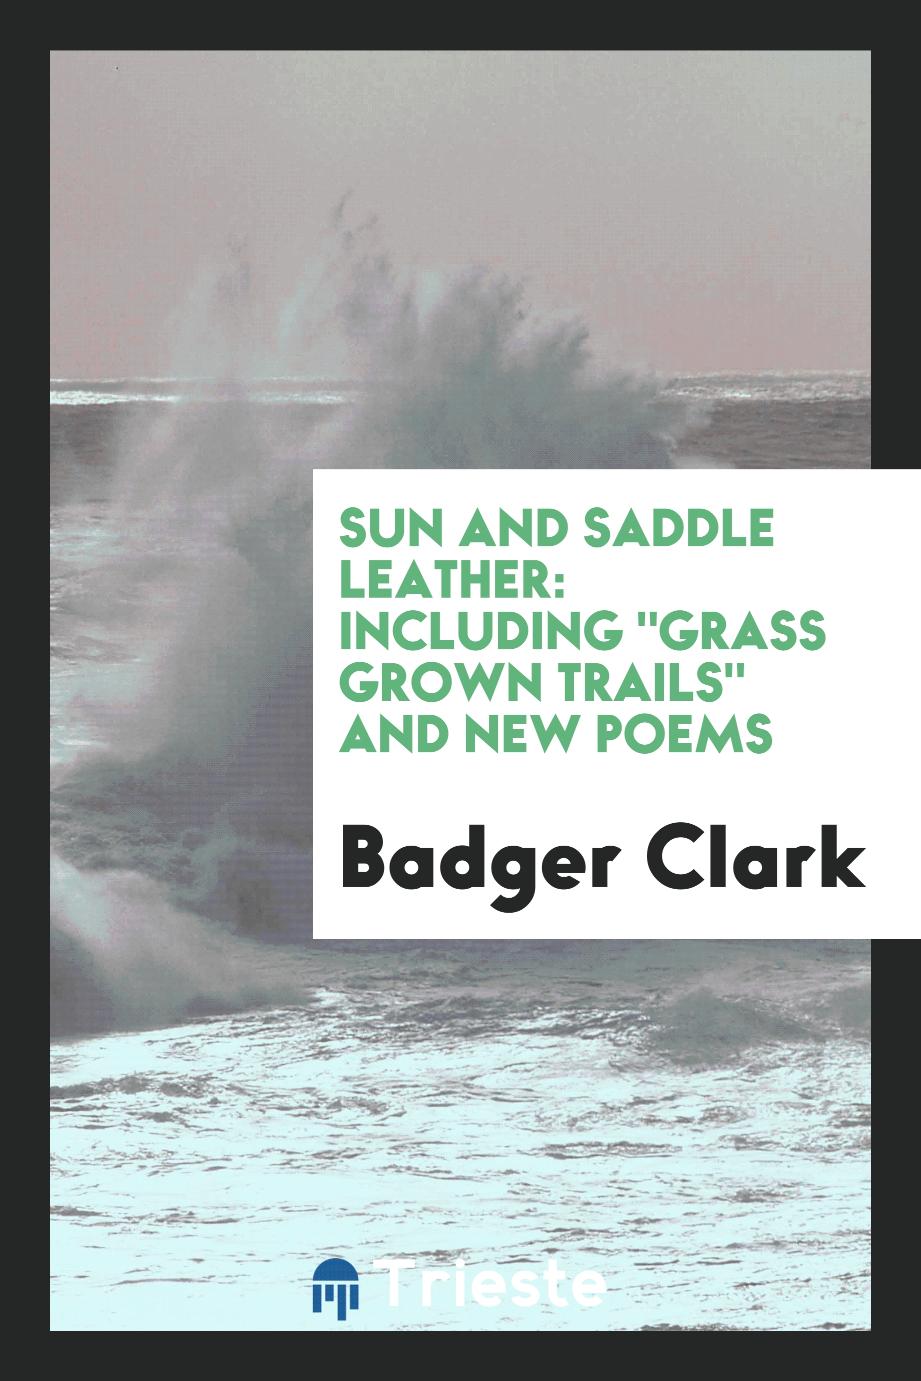 Badger Clark - Sun and saddle leather: including "Grass grown trails" and new poems